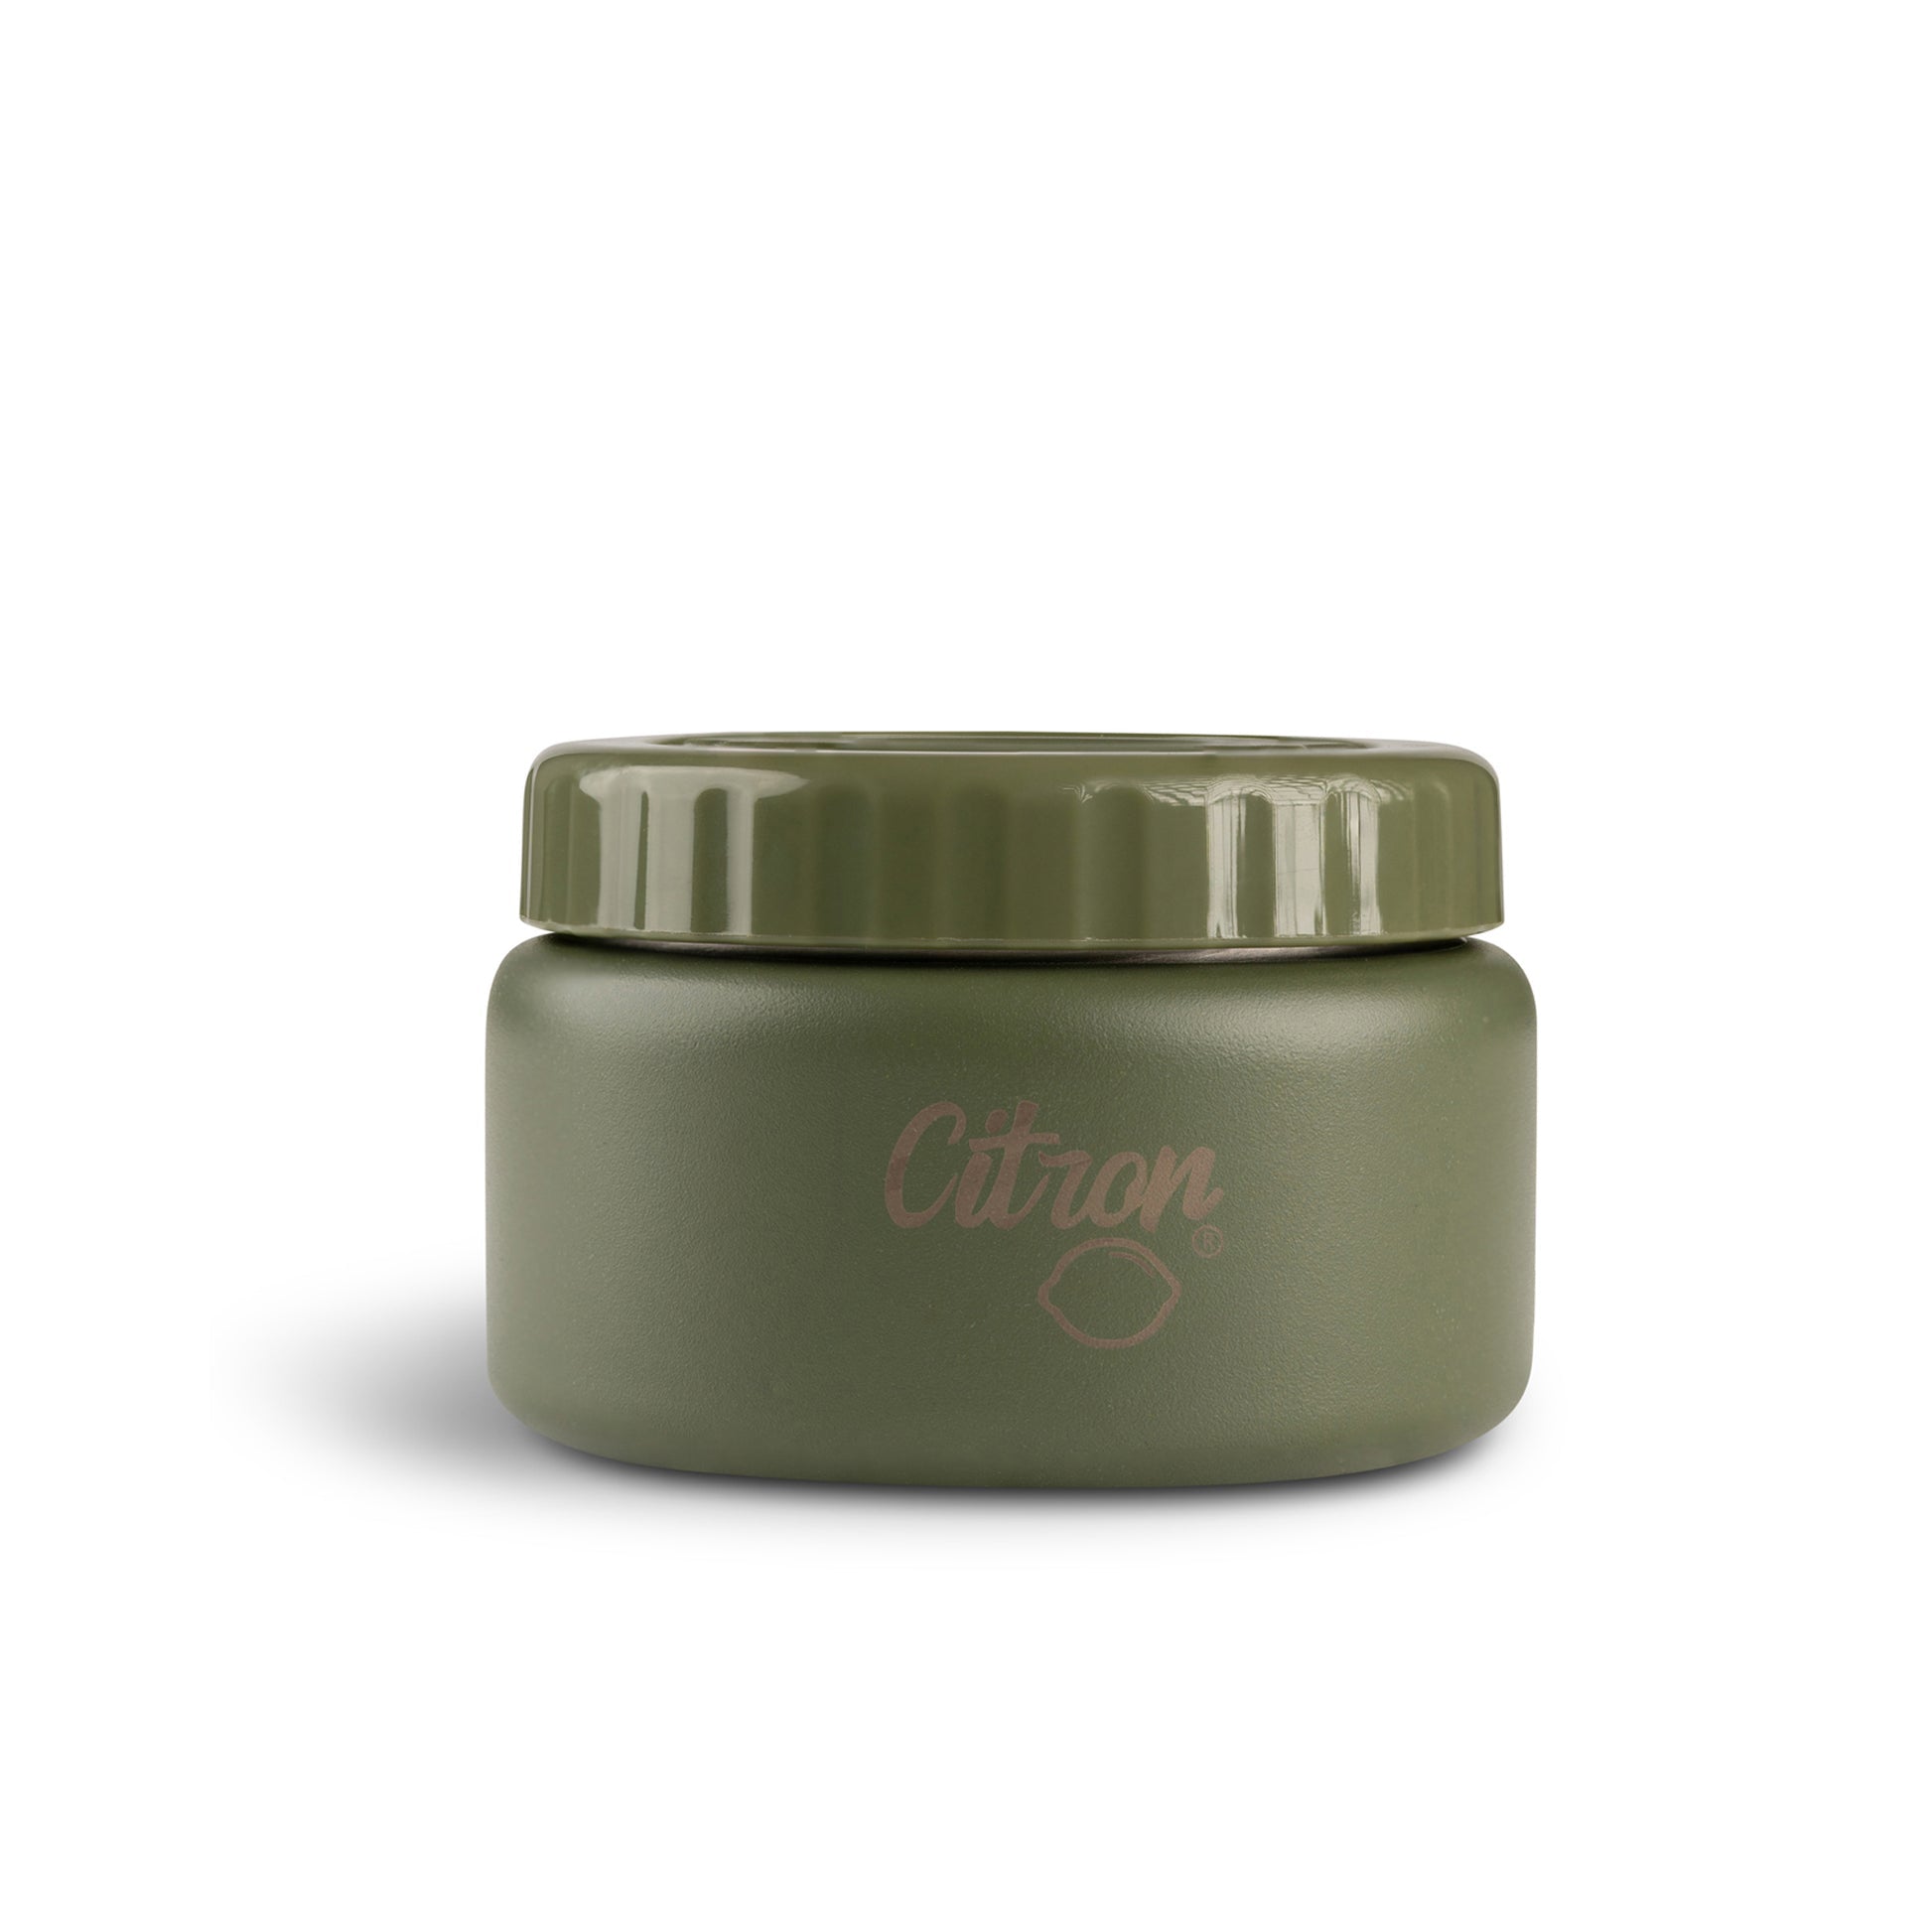 citron-food-jar-insulated-stainless-steel-250ml-olive-green-citr-96410- (1)